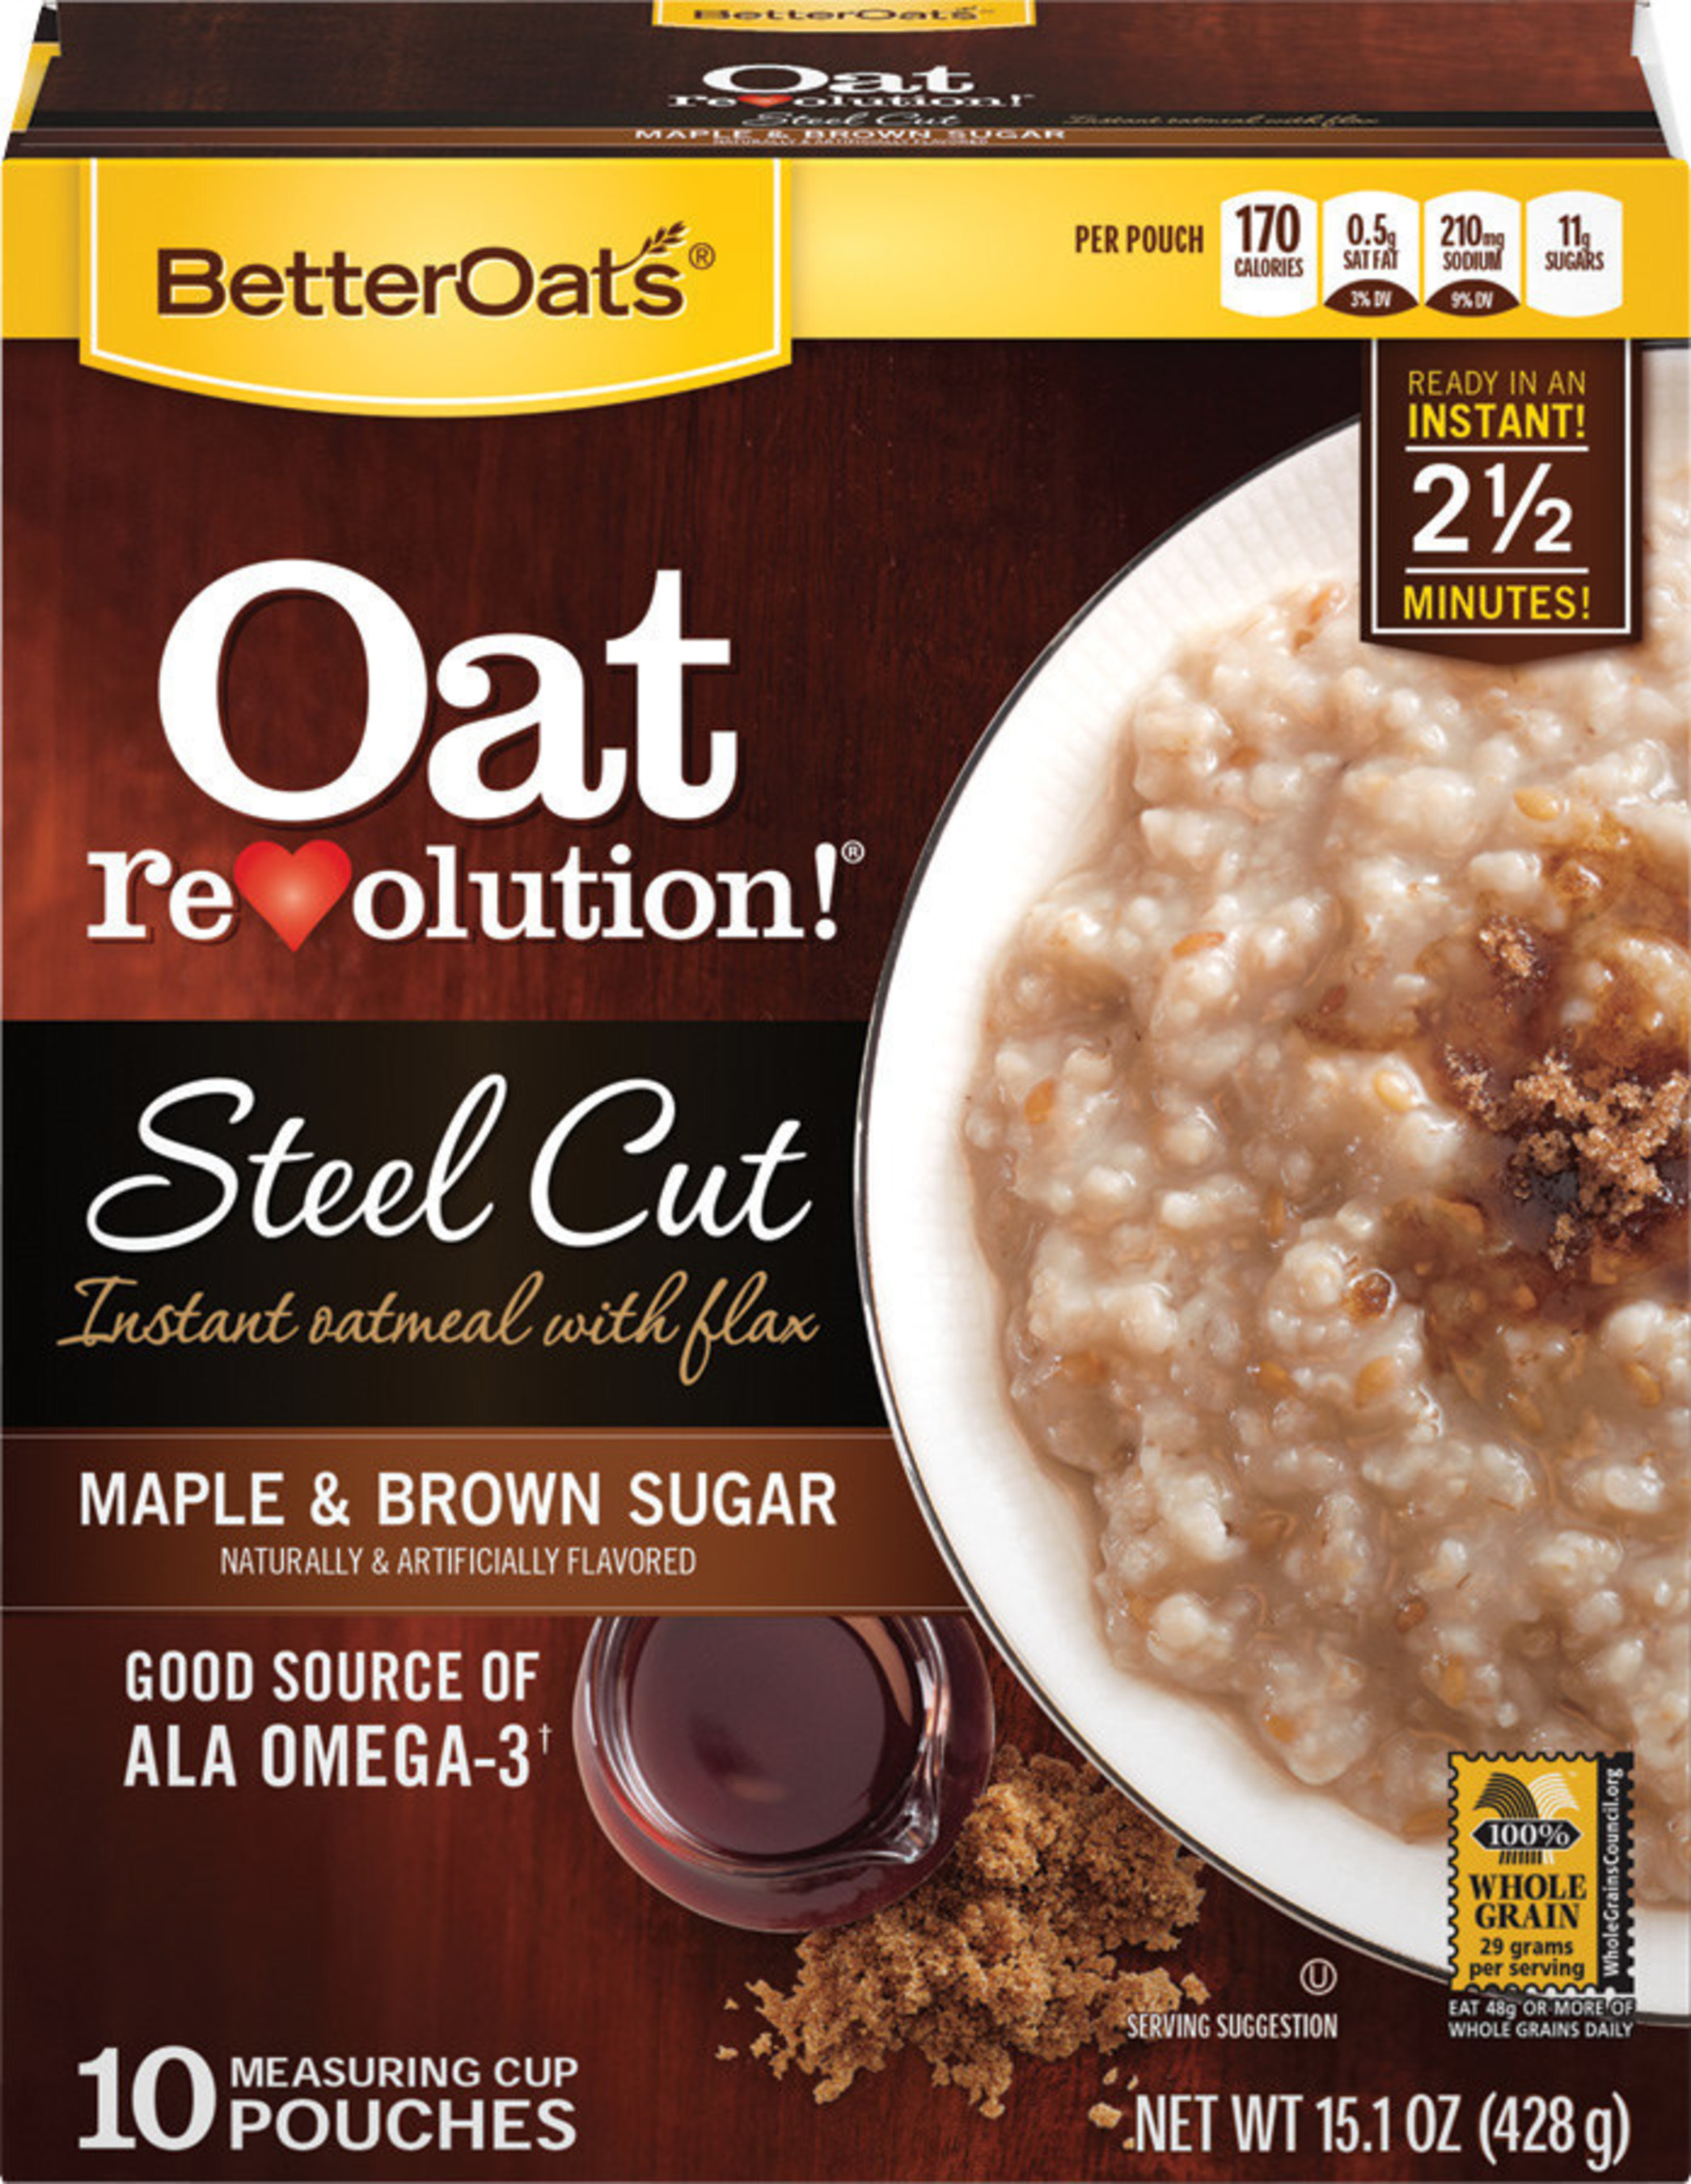 MOM Brands(R) Better Oats(R) Oat Revolution(R) Steel Cut Oatmeal was recently named a winner of Progressive Grocer's 2014 Editors' Picks Awards, the grocery industry's most esteemed new product recognition program. The product contains flaxseed, carries the 100 percent Whole Grain Stamp from the Whole Grains Council, and is a good source of fiber and ALA-Omega 3. Its premium steel cut oats are sliced thick to preserve their natural consistency, adding to the product's hearty taste and texture. (PRNewsFoto/MOM Brands)